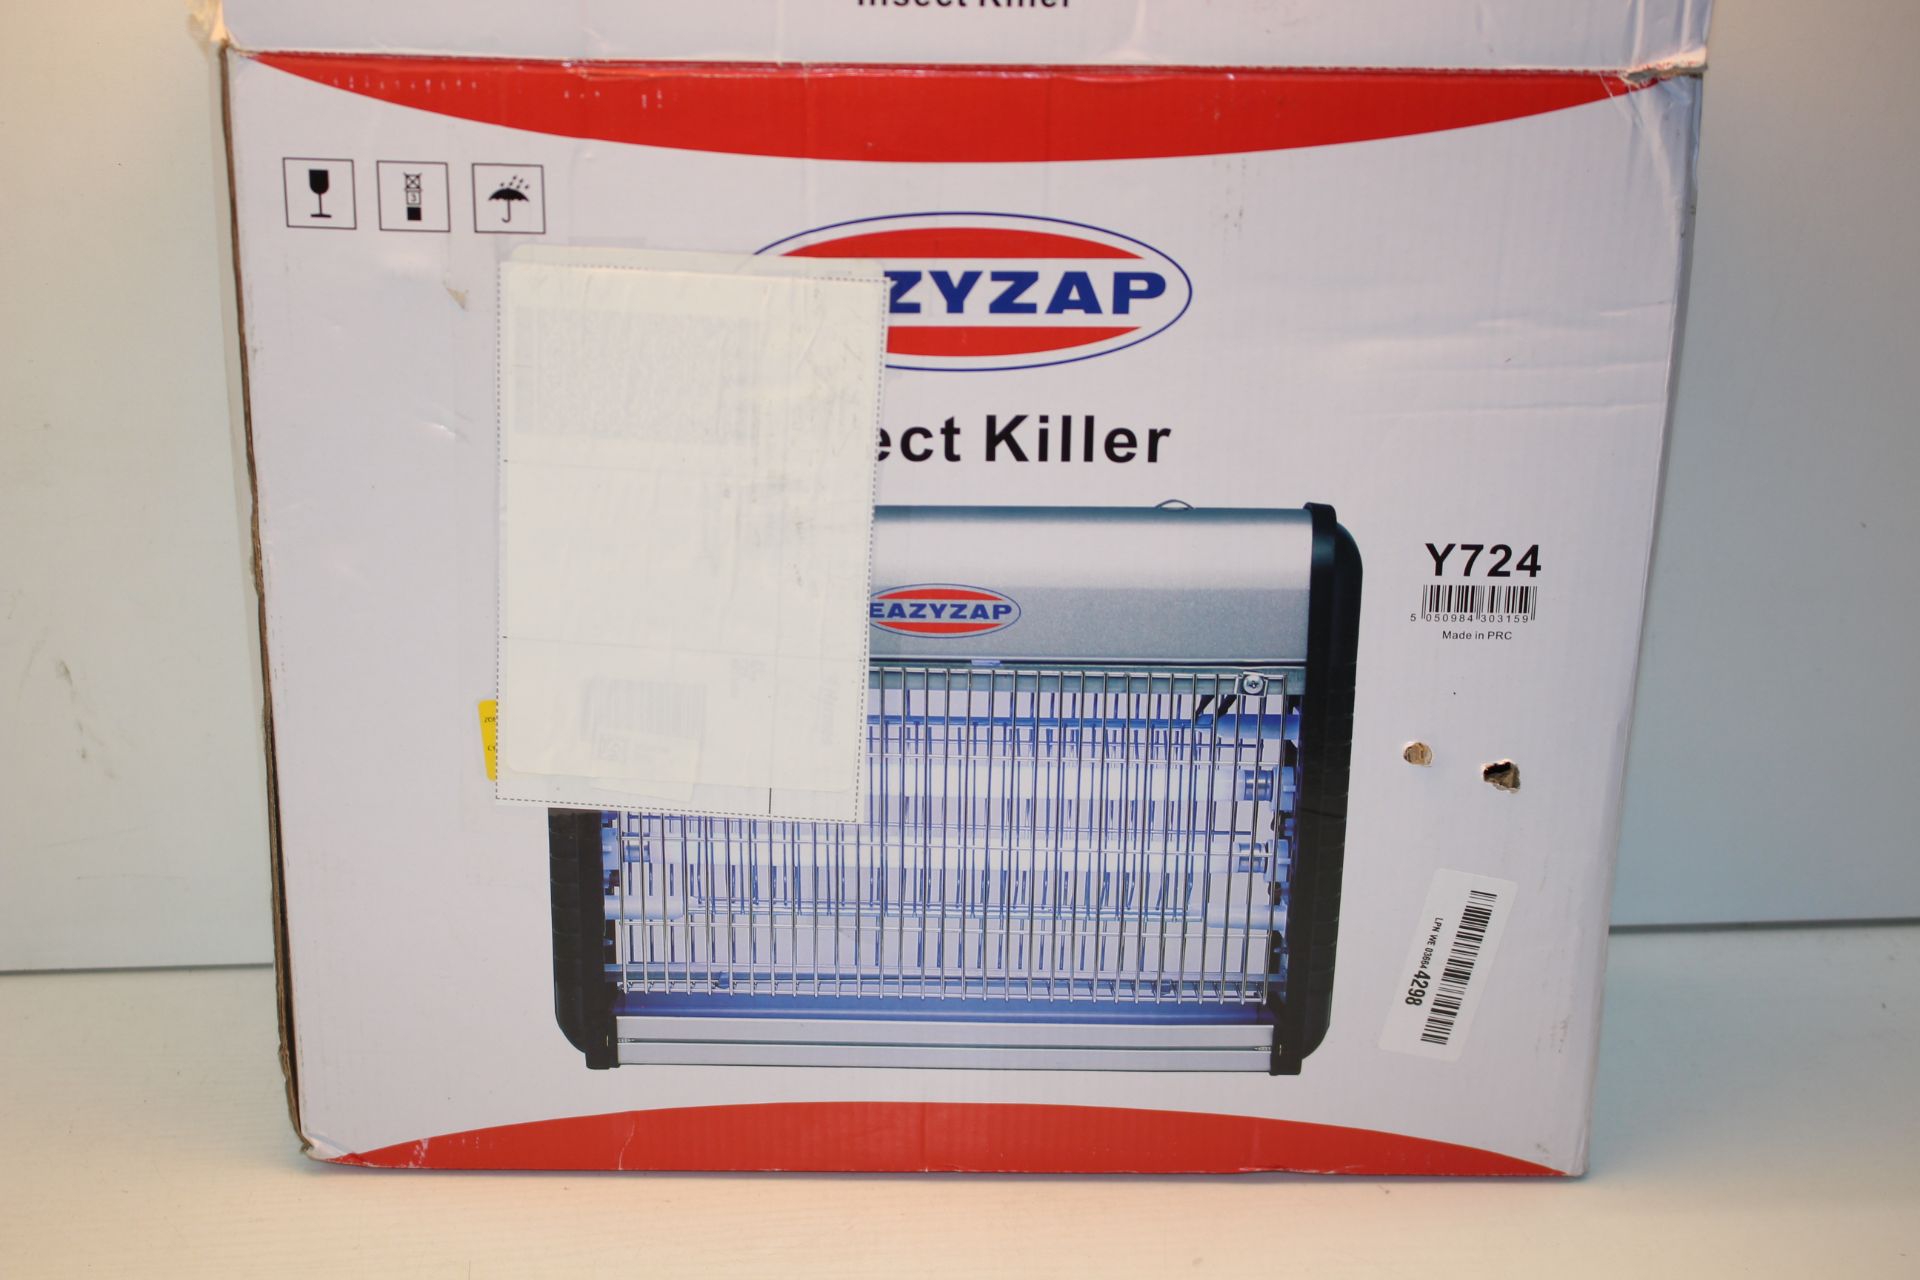 BOXED EAZYZAP INSECT KILLER RRP £29.99Condition ReportAppraisal Available on Request- All Items